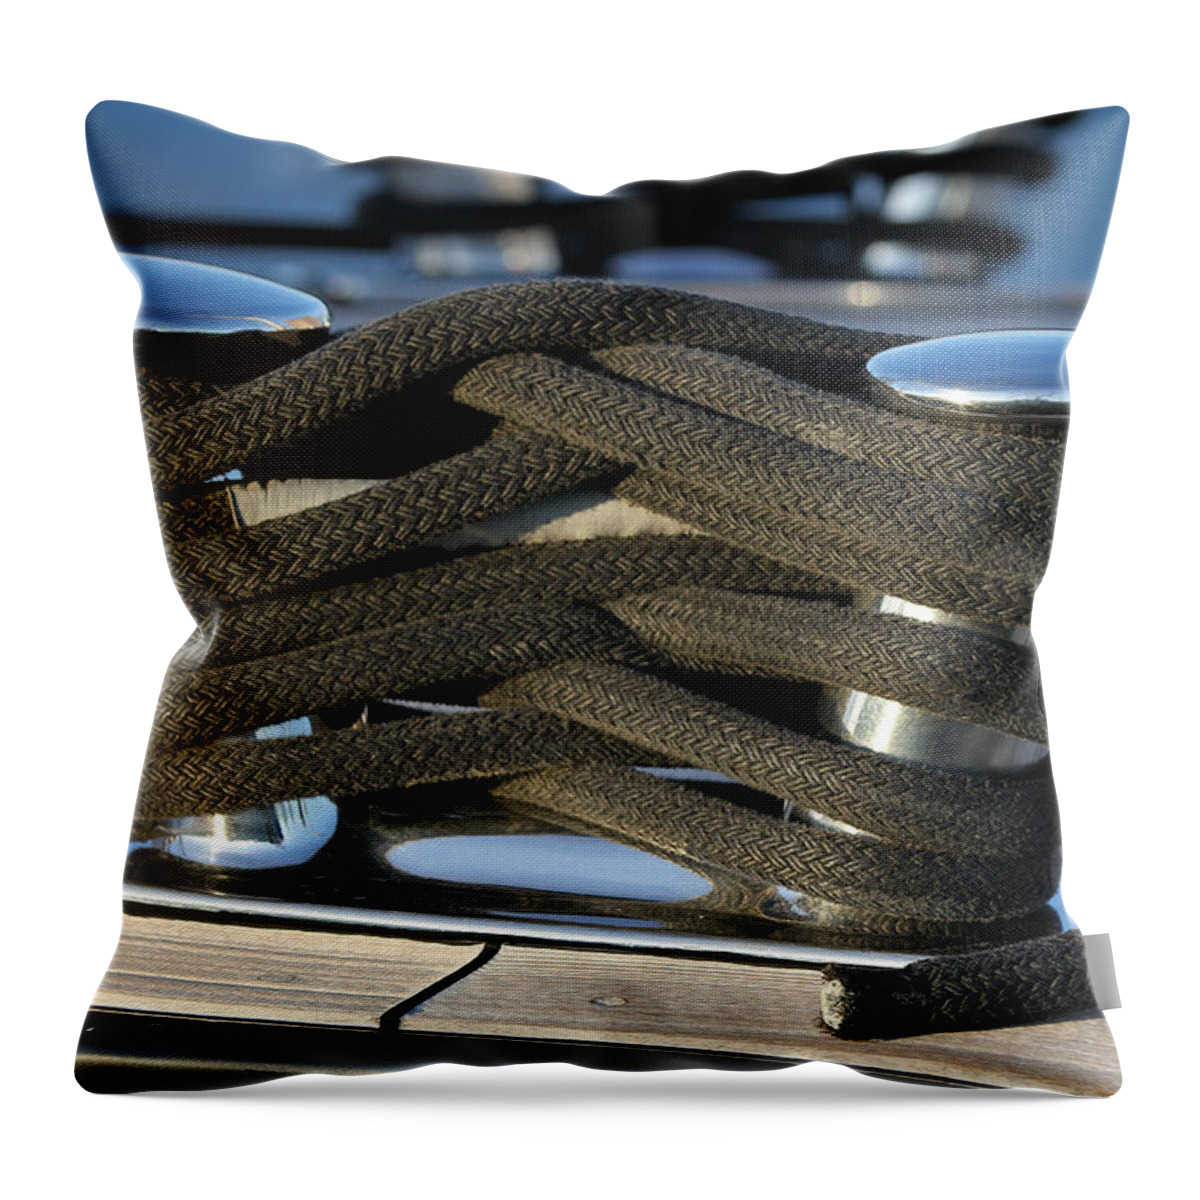 Sailboat Throw Pillow featuring the photograph Sailboat Cleat by Juergen Roth